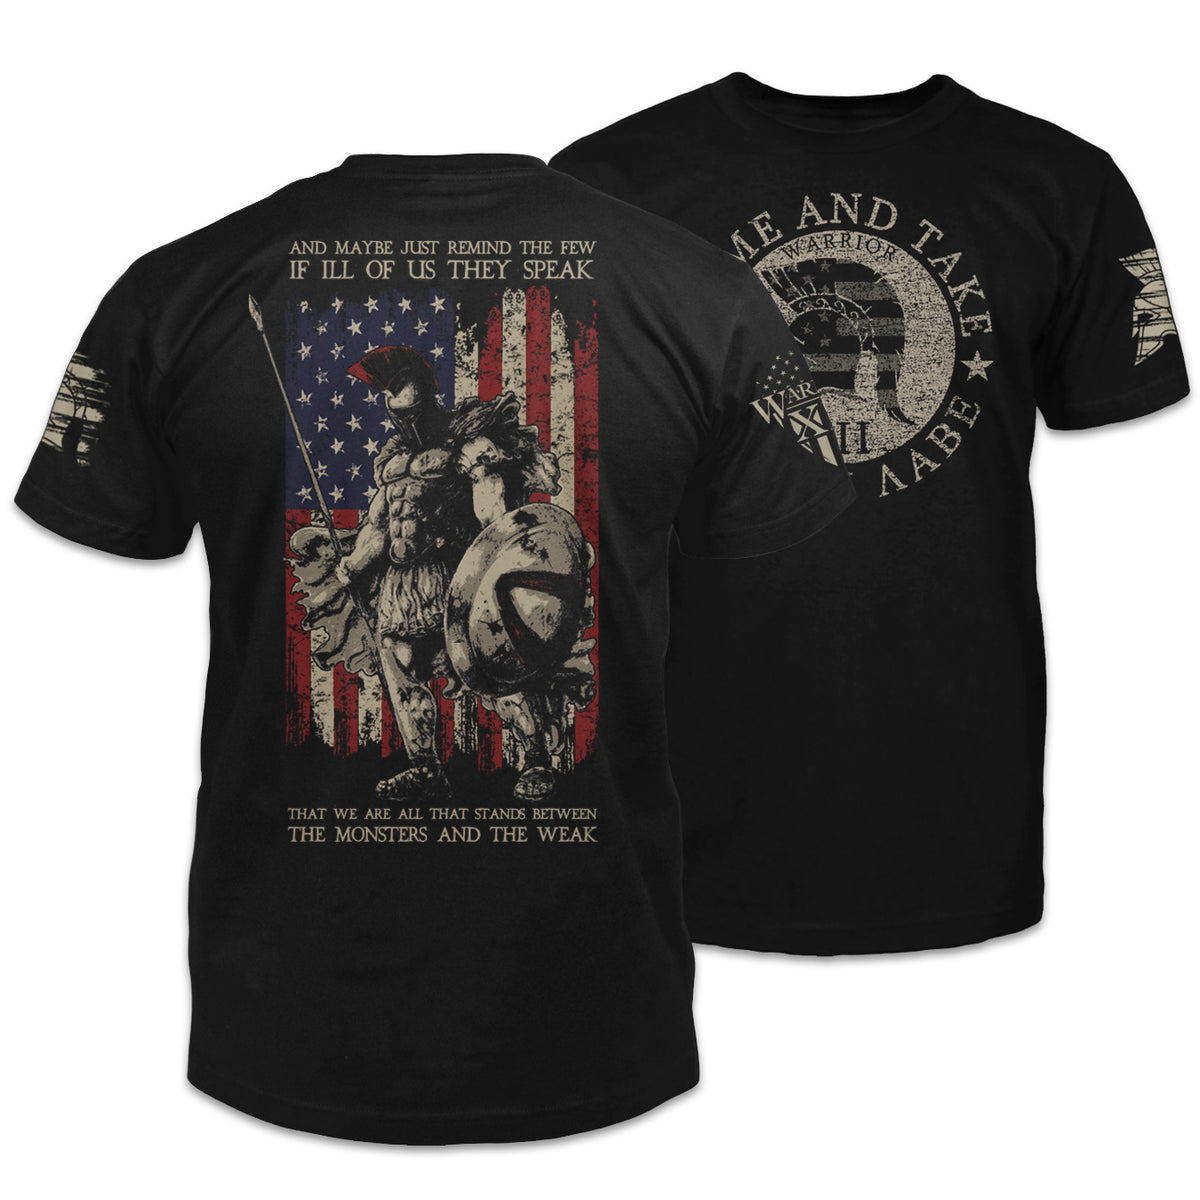 Front & back black t-shirt with an "American Spartan" printed on the shirt.